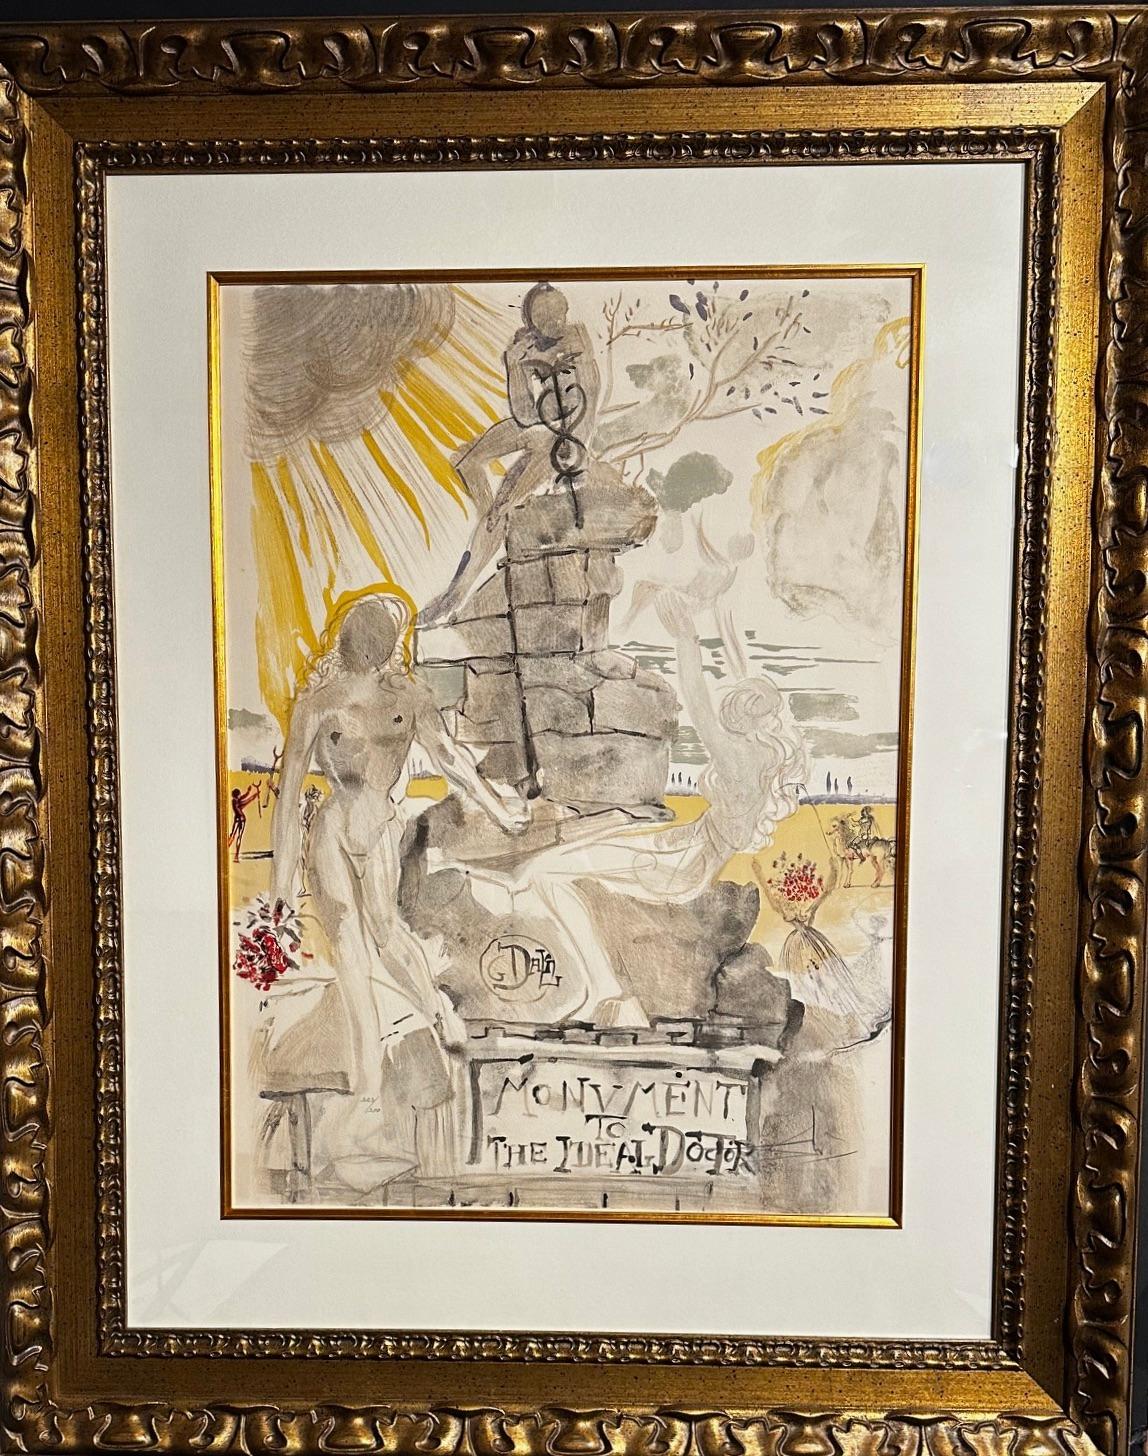 Monument To The Ideal Doctor - Surrealist Print by Salvador Dalí